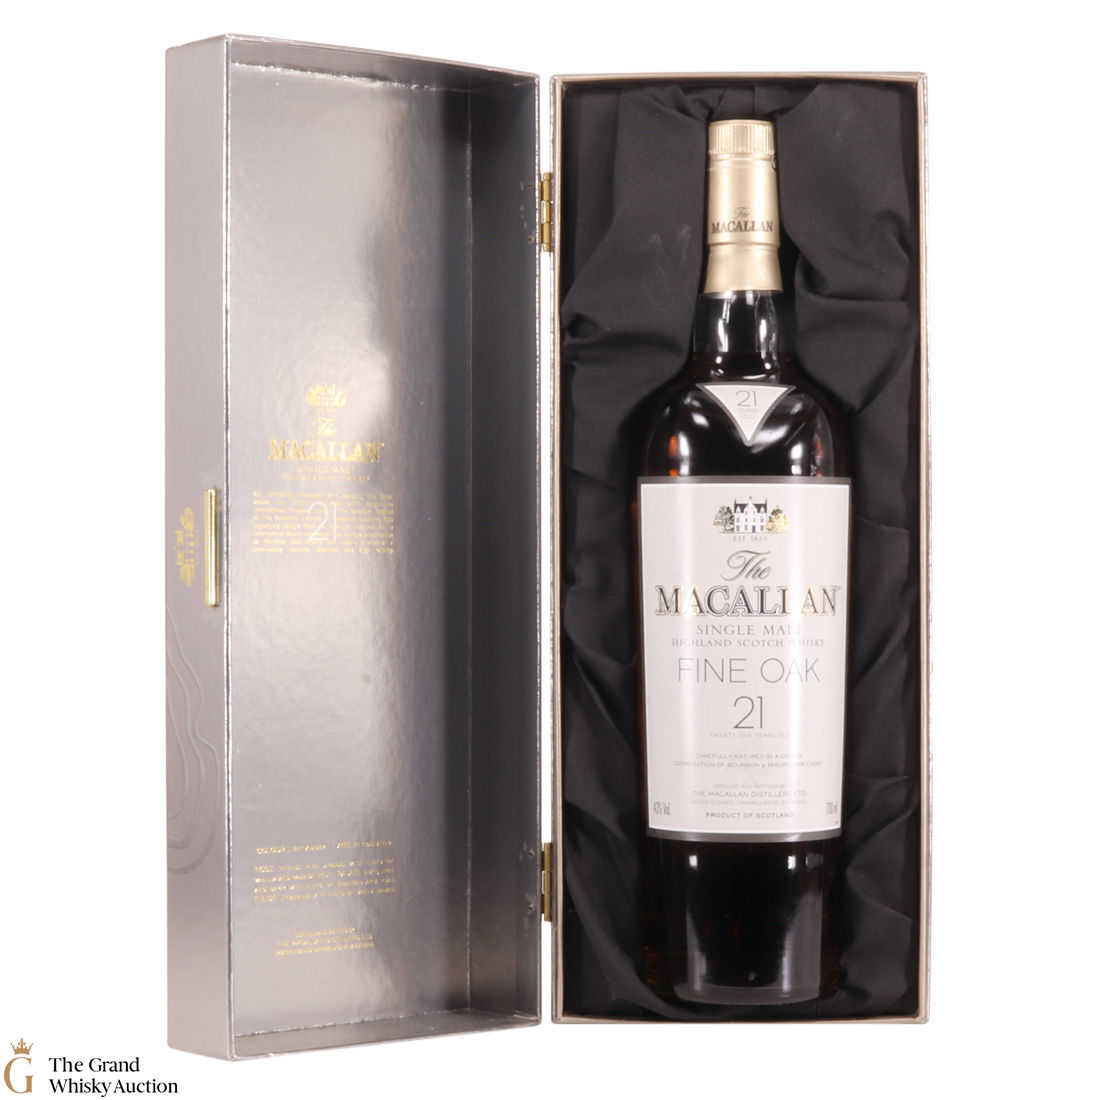 Macallan 21 Year Old Fine Oak Auction The Grand Whisky Auction